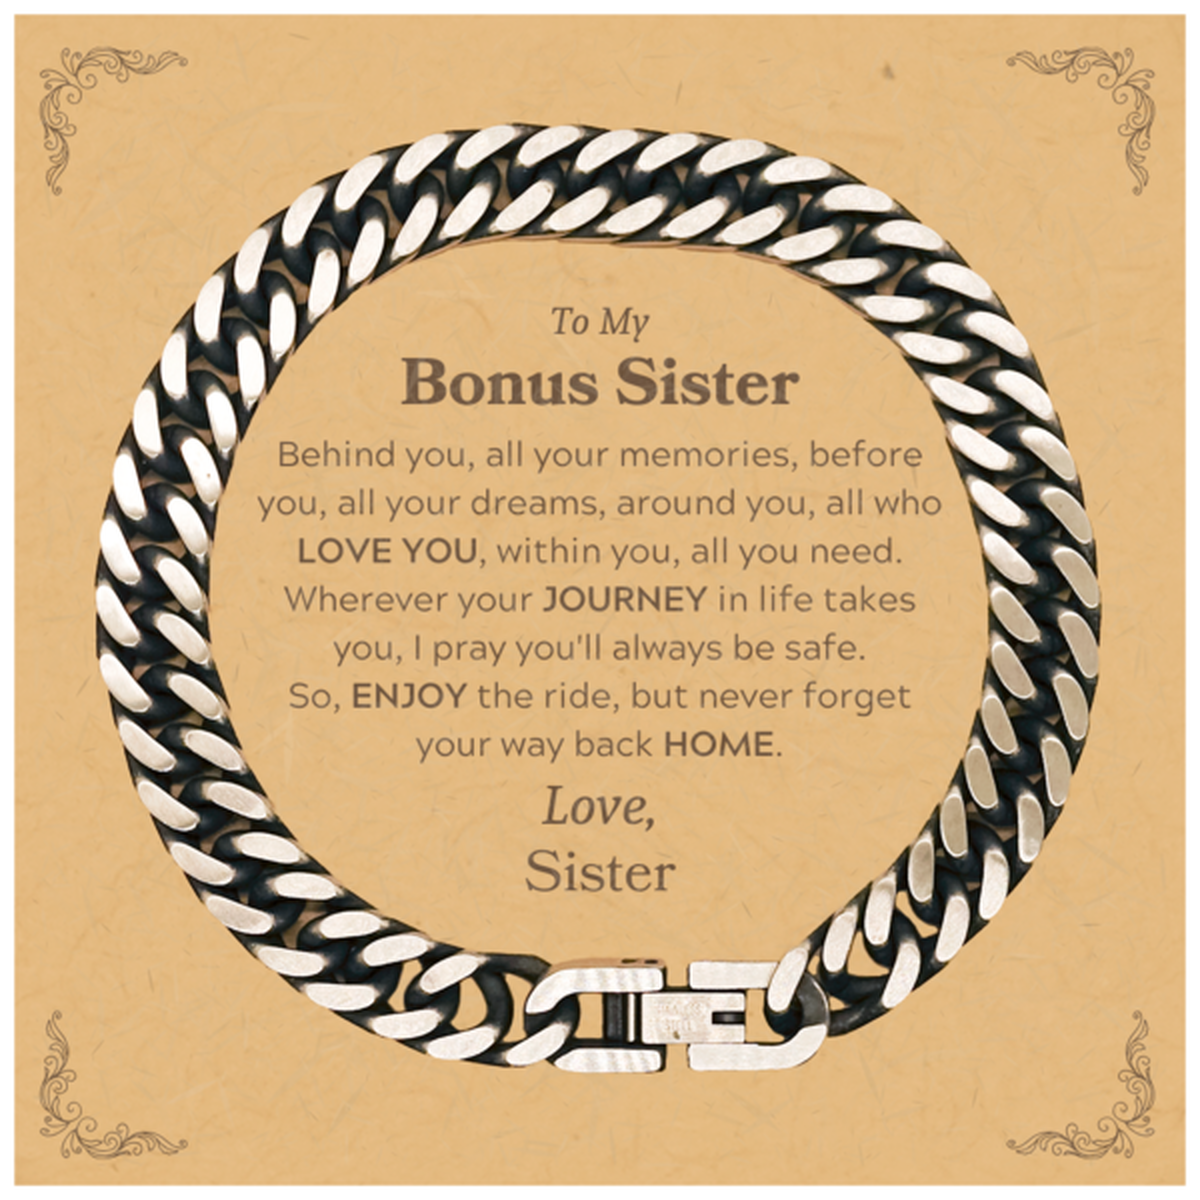 To My Bonus Sister Graduation Gifts from Sister, Bonus Sister Cuban Link Chain Bracelet Christmas Birthday Gifts for Bonus Sister Behind you, all your memories, before you, all your dreams. Love, Sister